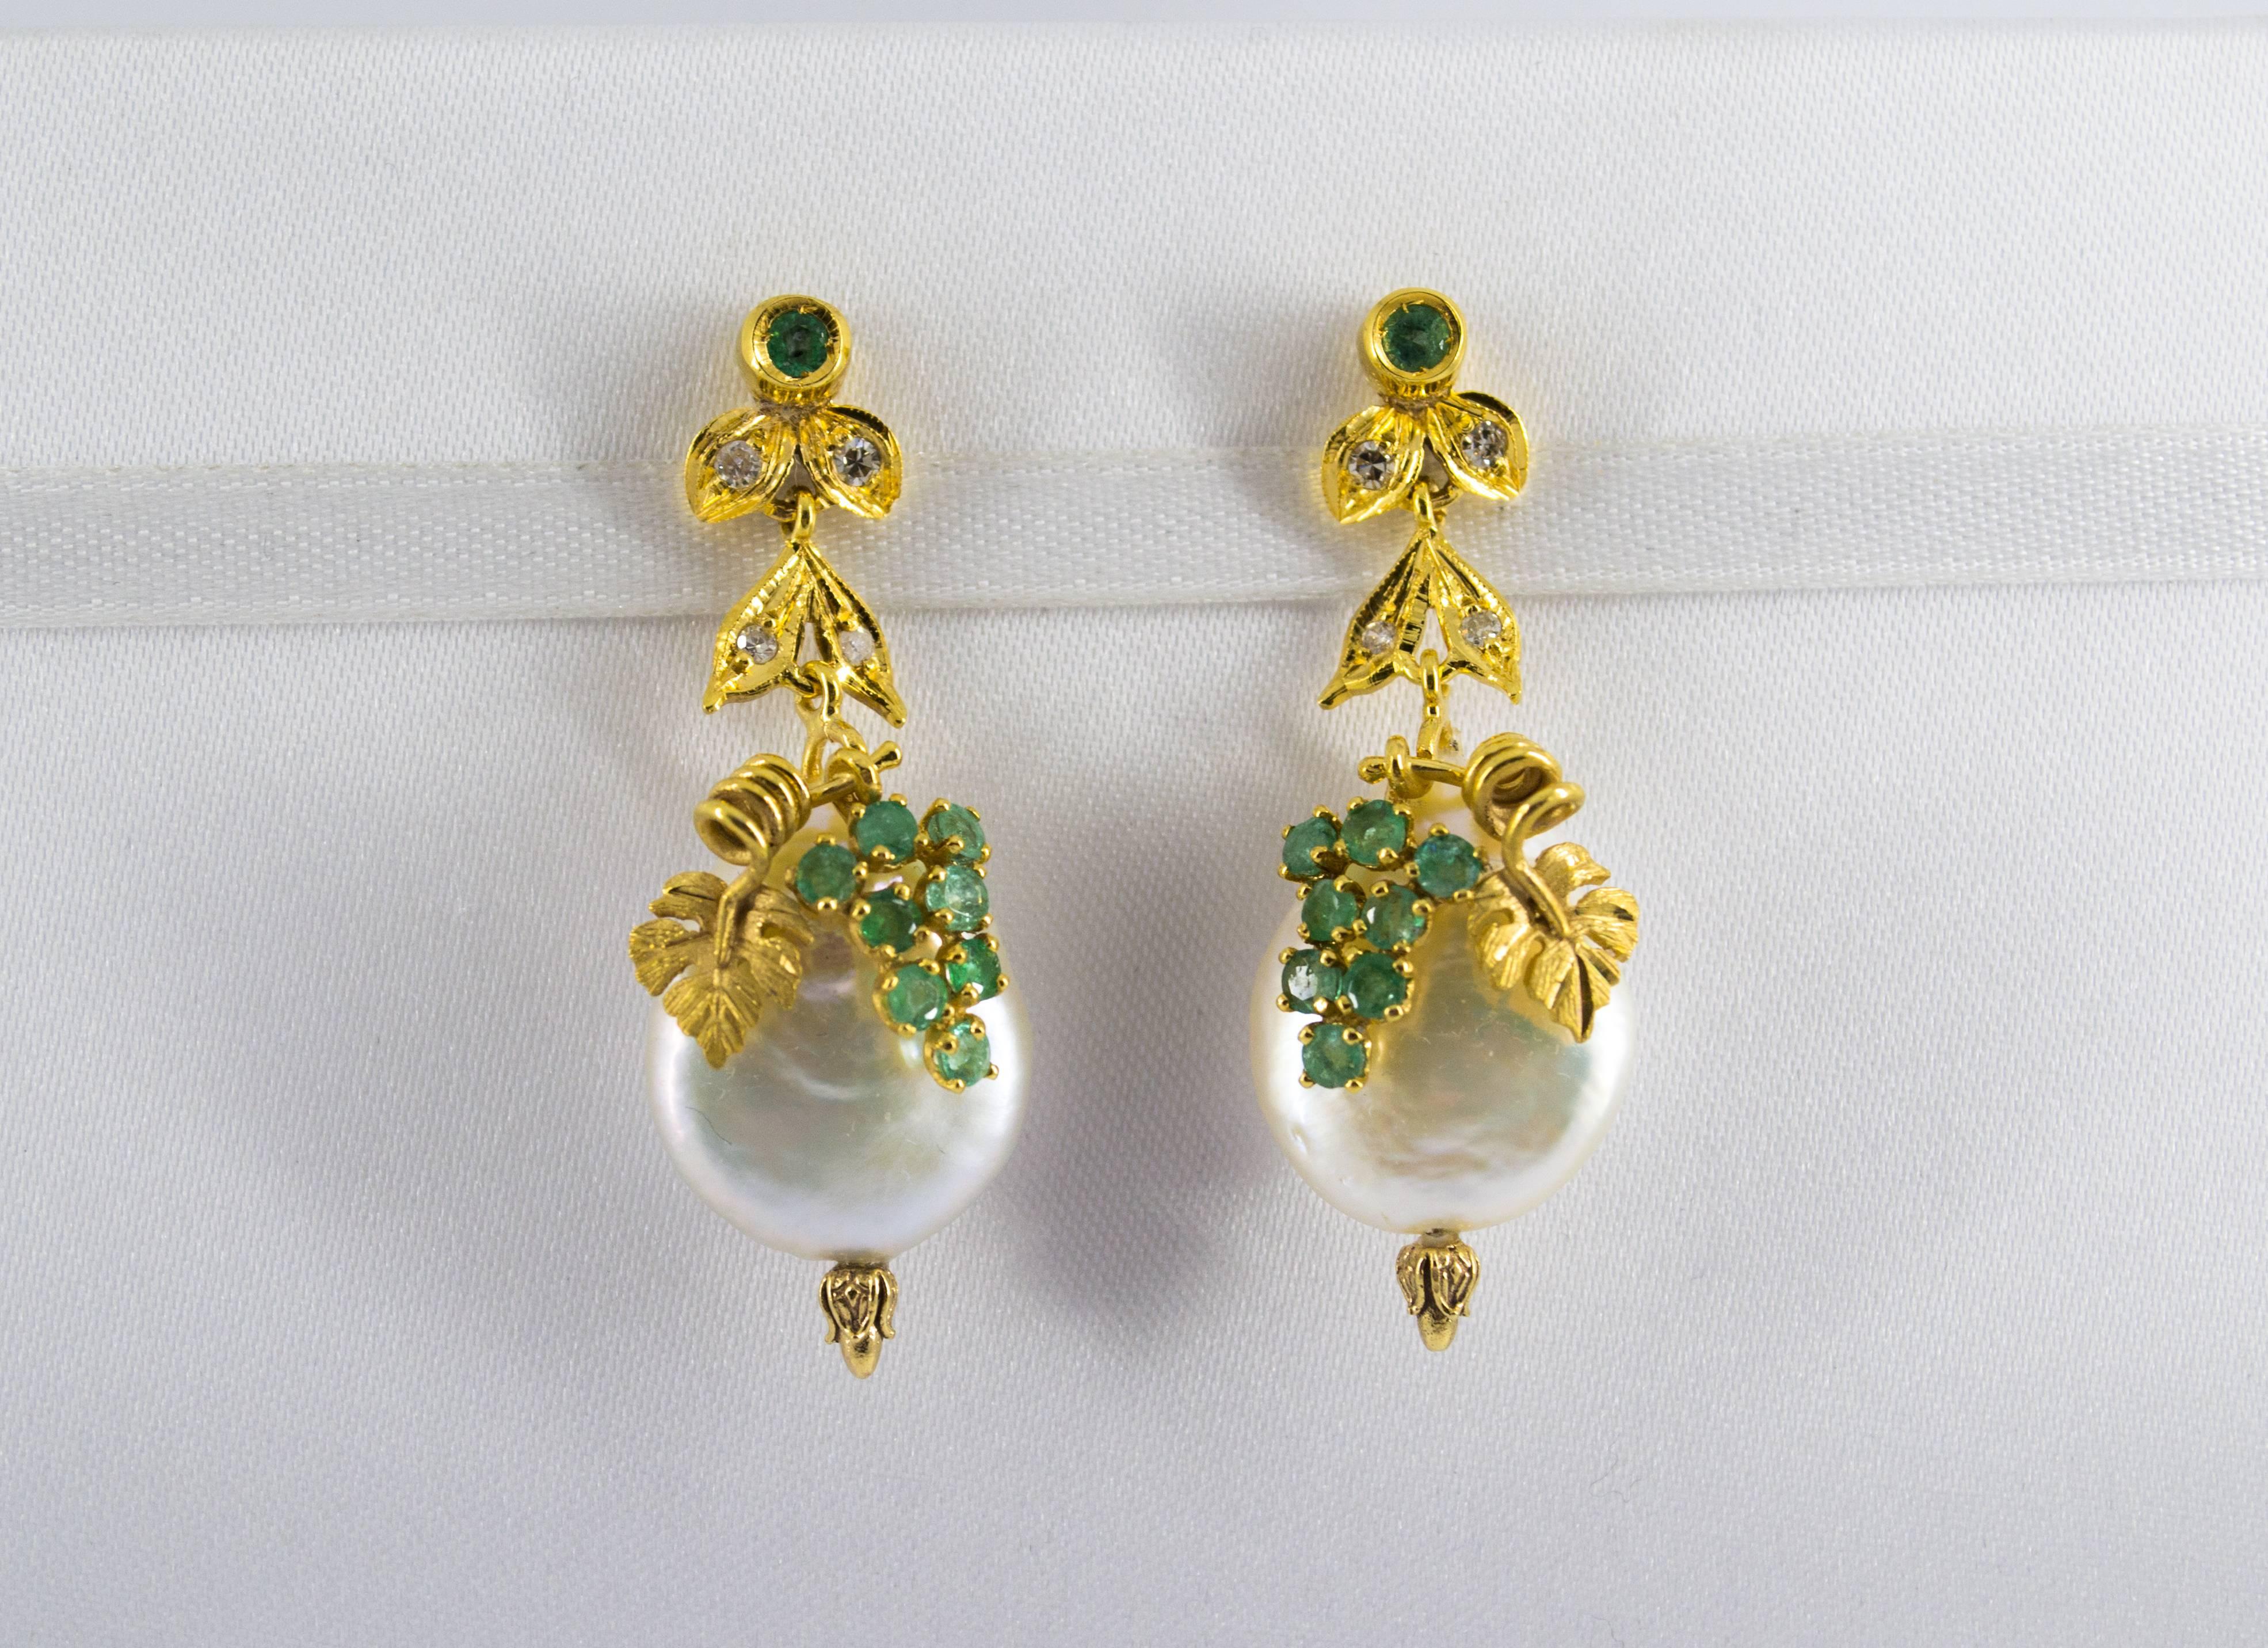 These Earrings are made of 14K Yellow Gold.
These Earrings have 0.16 Carats of Diamonds.
These Earrings have 0.50 Carats of Emeralds.
These Earrings have also Pearls.
We're a workshop so every piece is handmade, customizable and resizable.